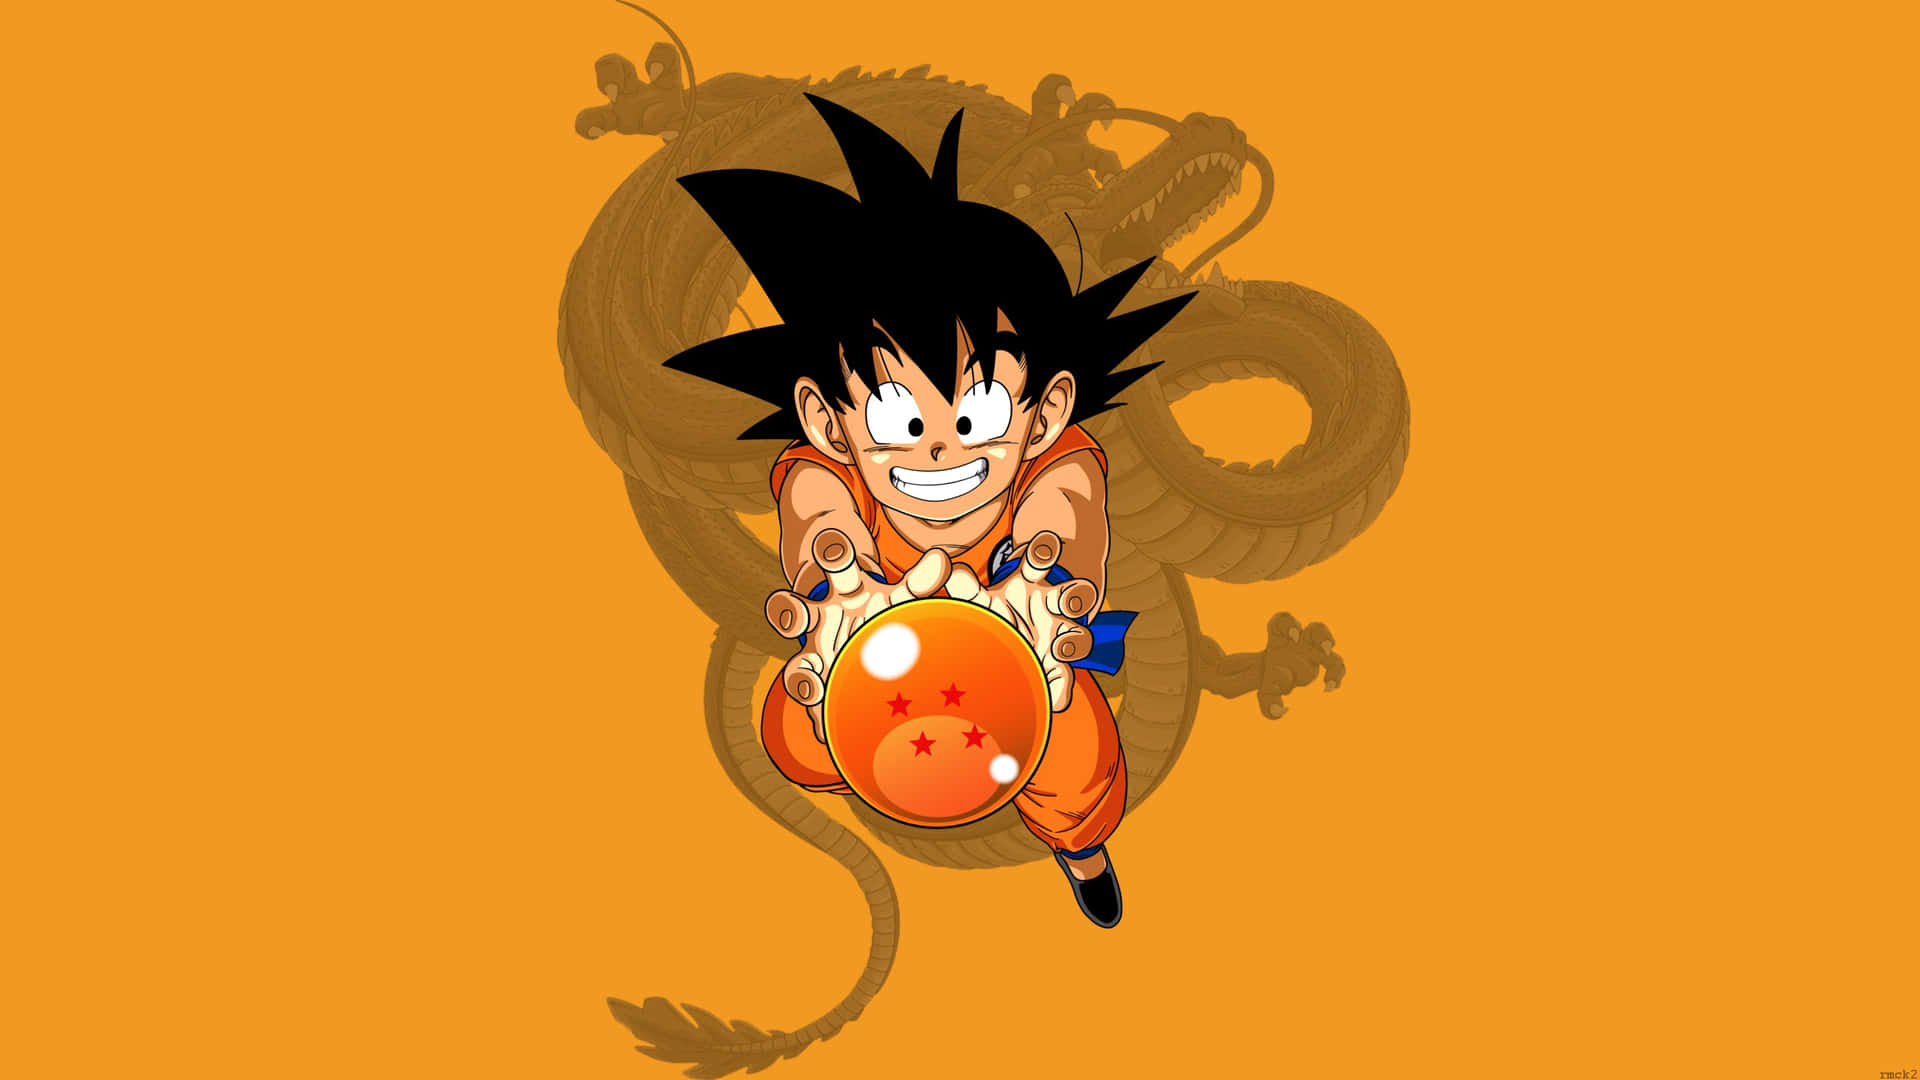 "Kid Goku Leads a New Generation of Fighters" Wallpaper